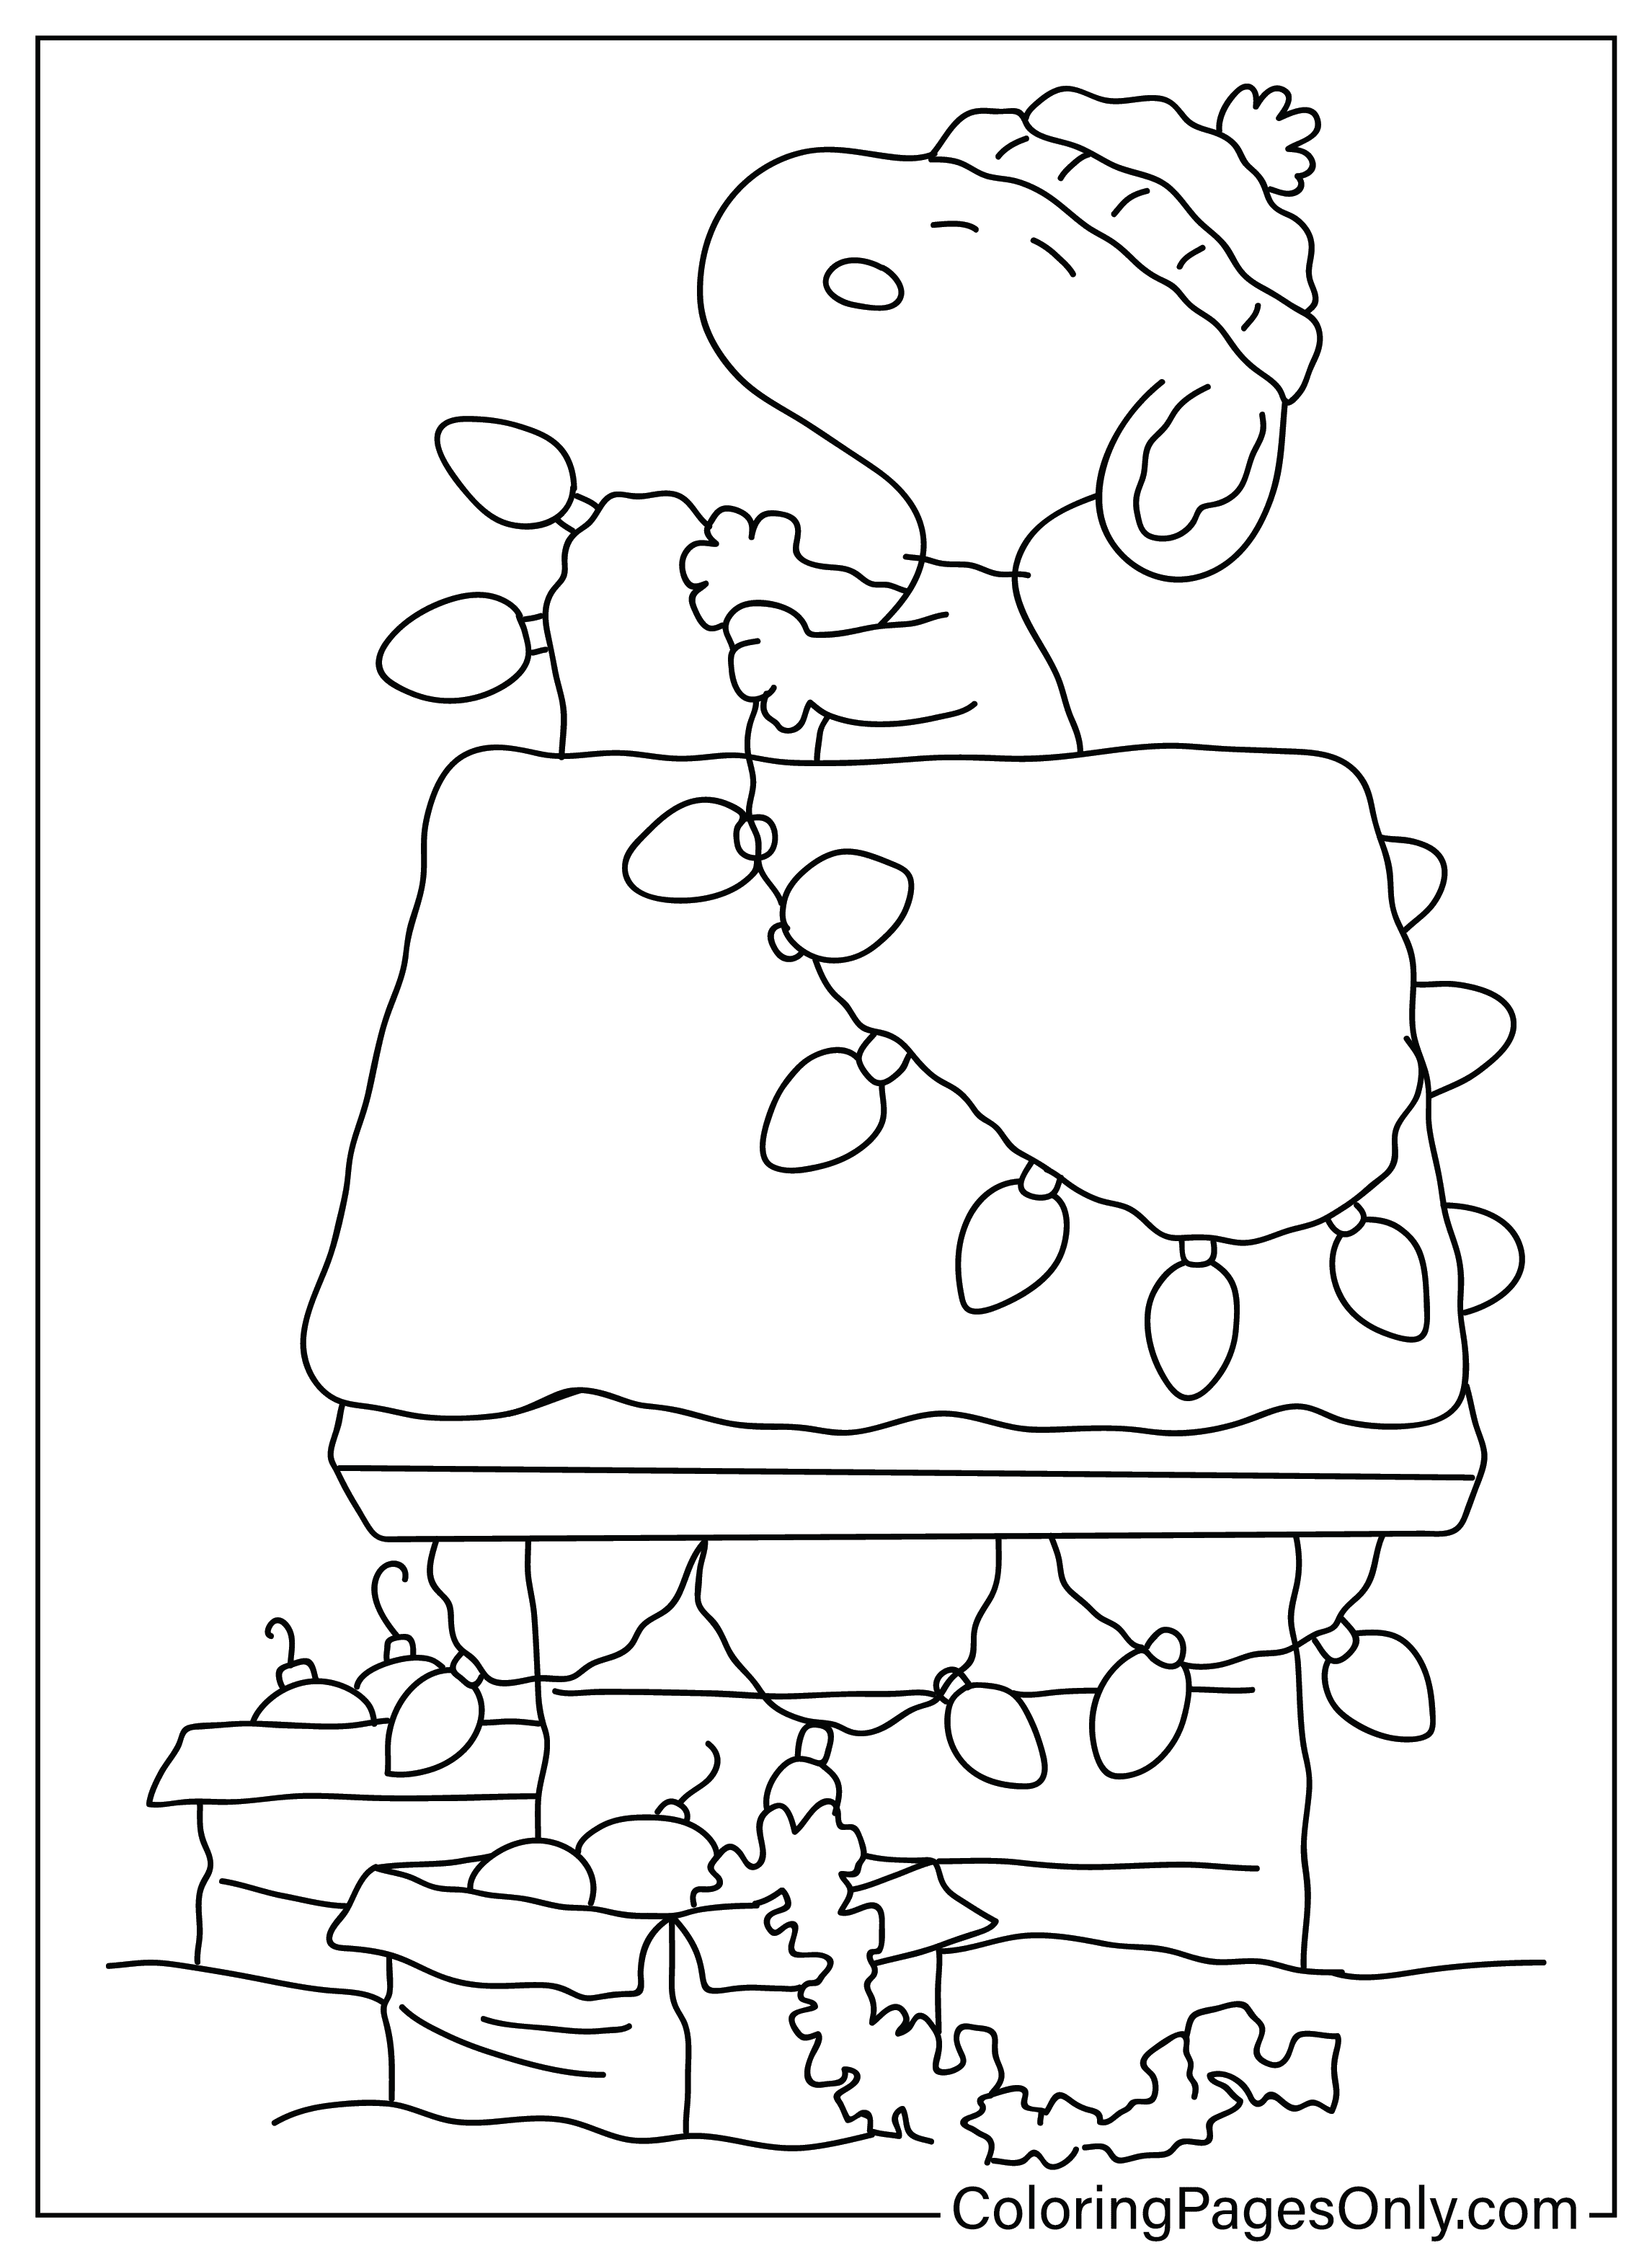 Christmas Snoopy Coloring Page Free Printable Coloring Pages